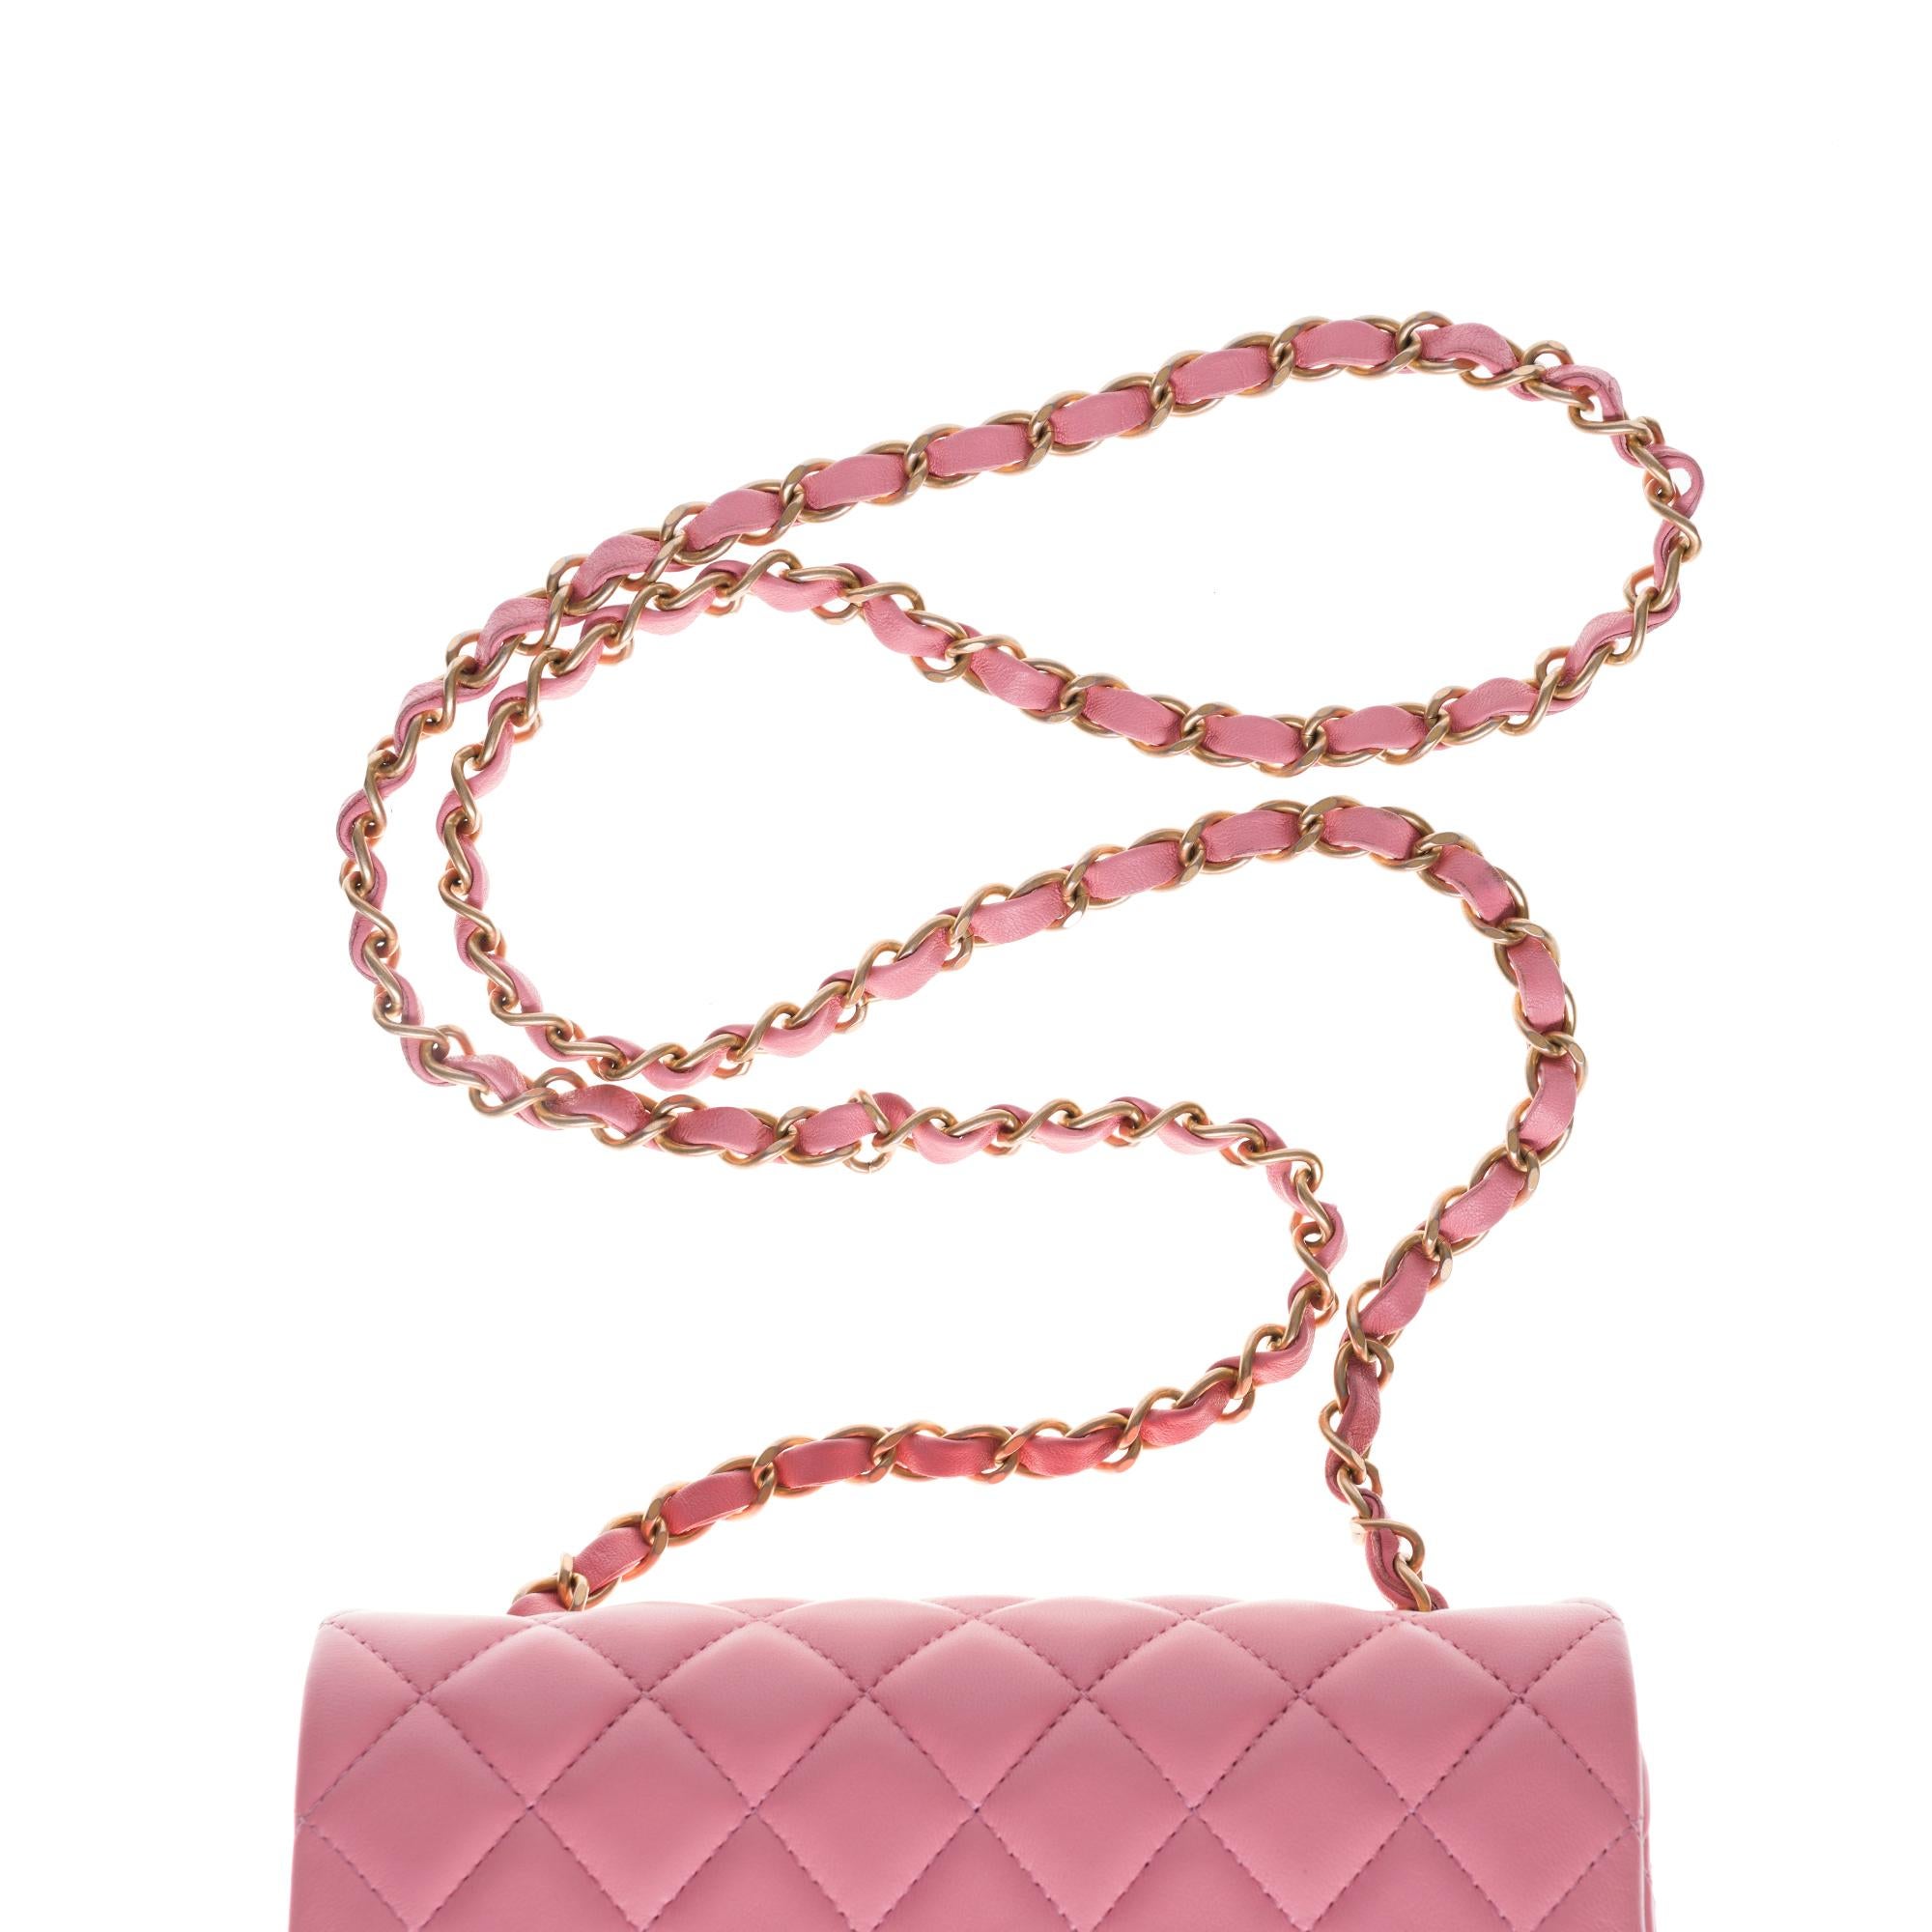 Chanel Mini Timeless Shoulder bag in Pink quilted leather and gold hardware 2